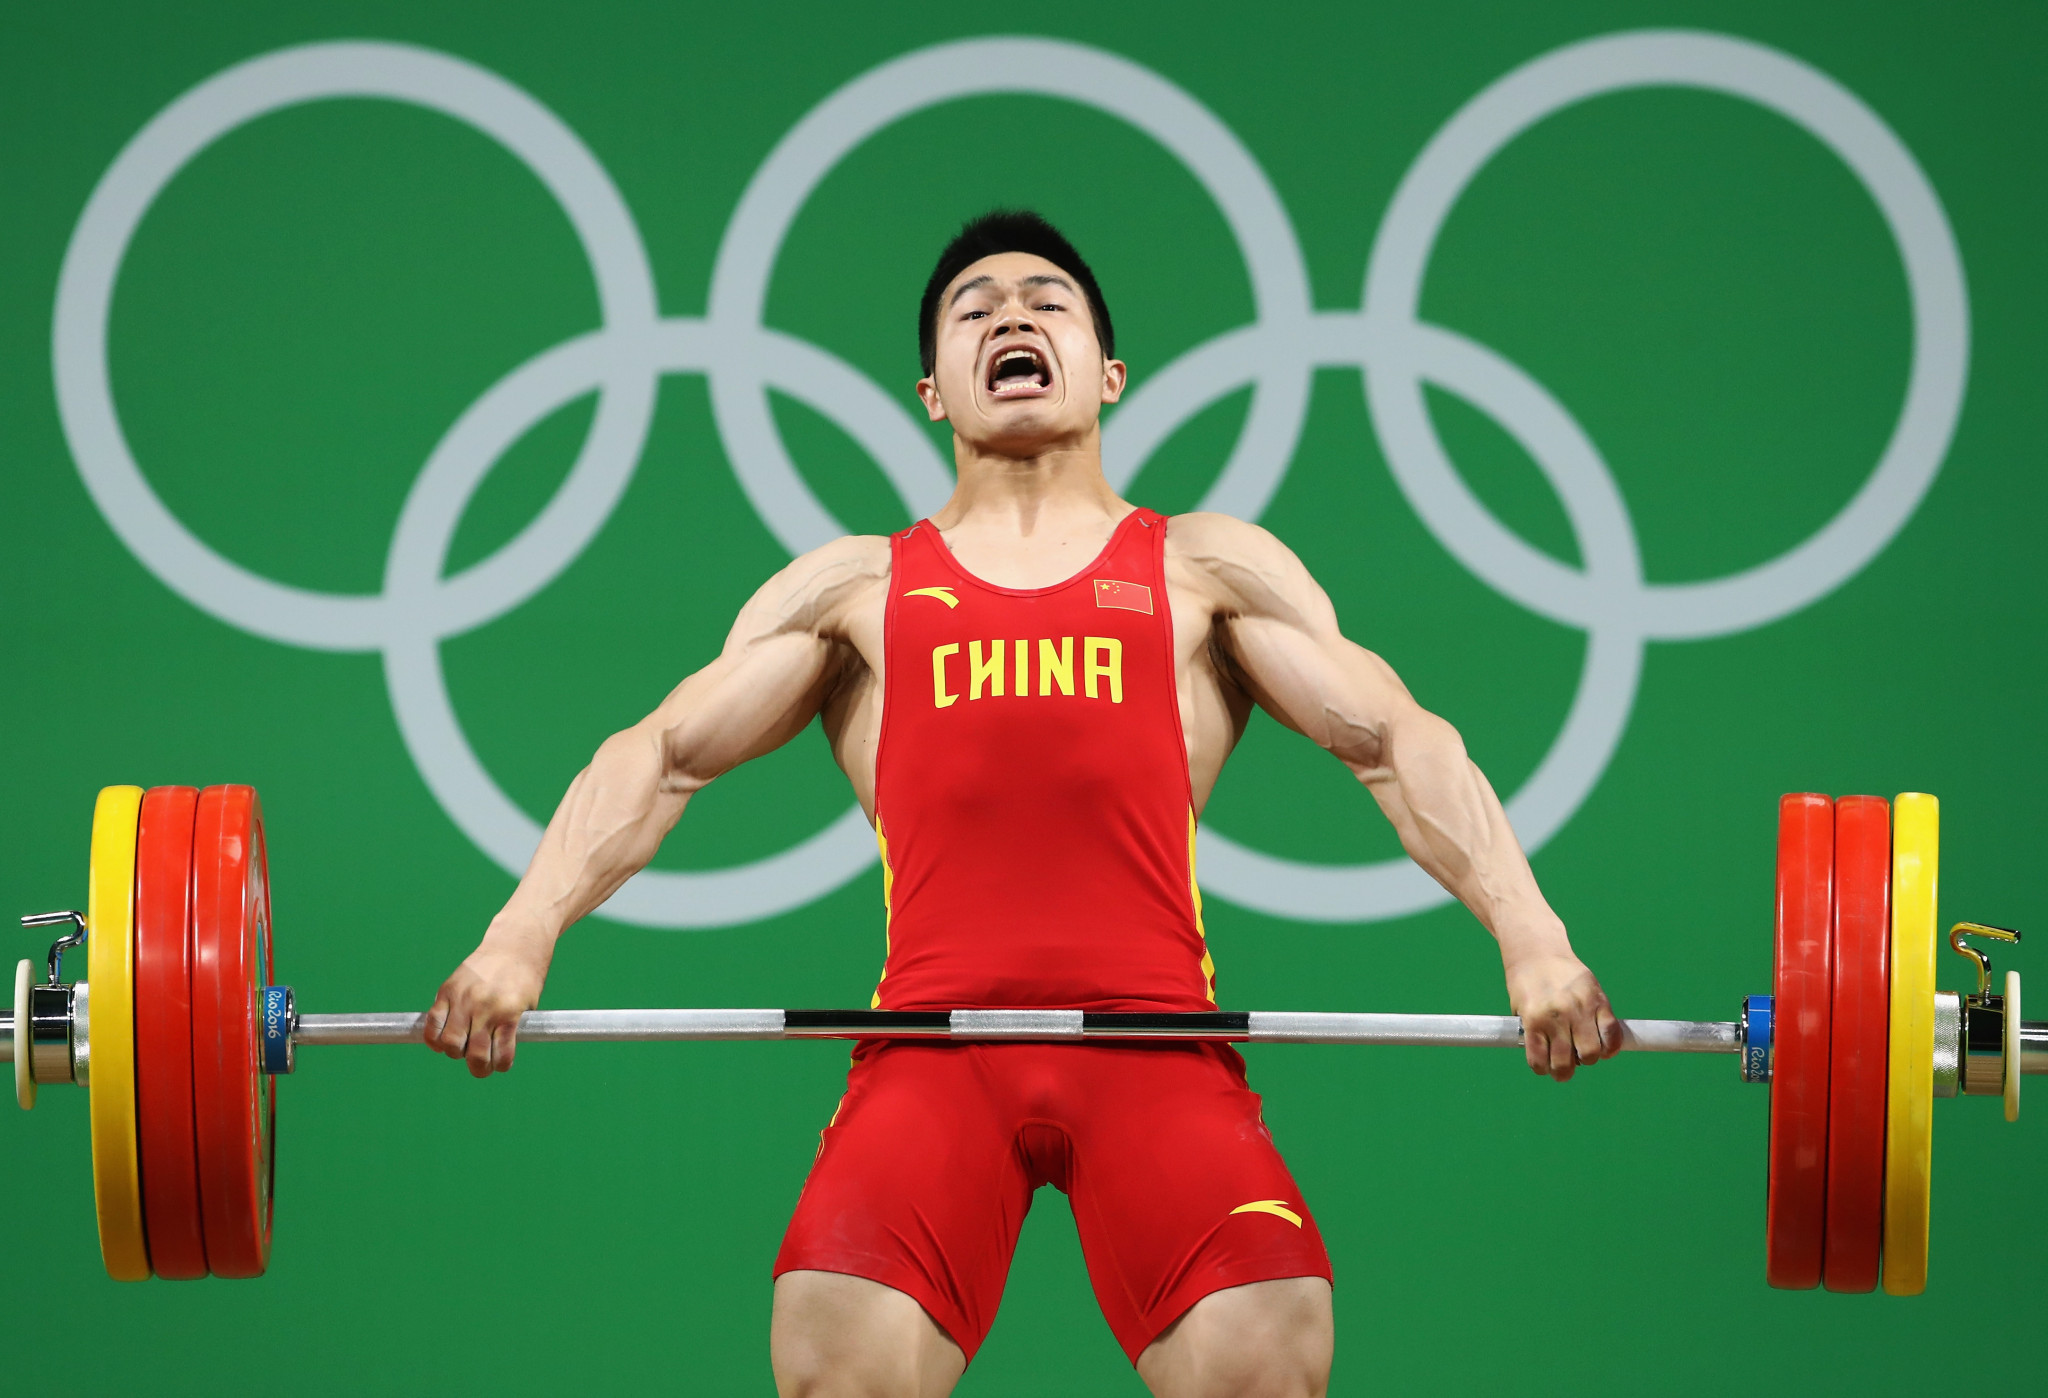 Zhiyong Shi, of China, competes during the men's 69kg Group A weightlifting contest at the Rio 2016 Olympic Games ©Getty Images